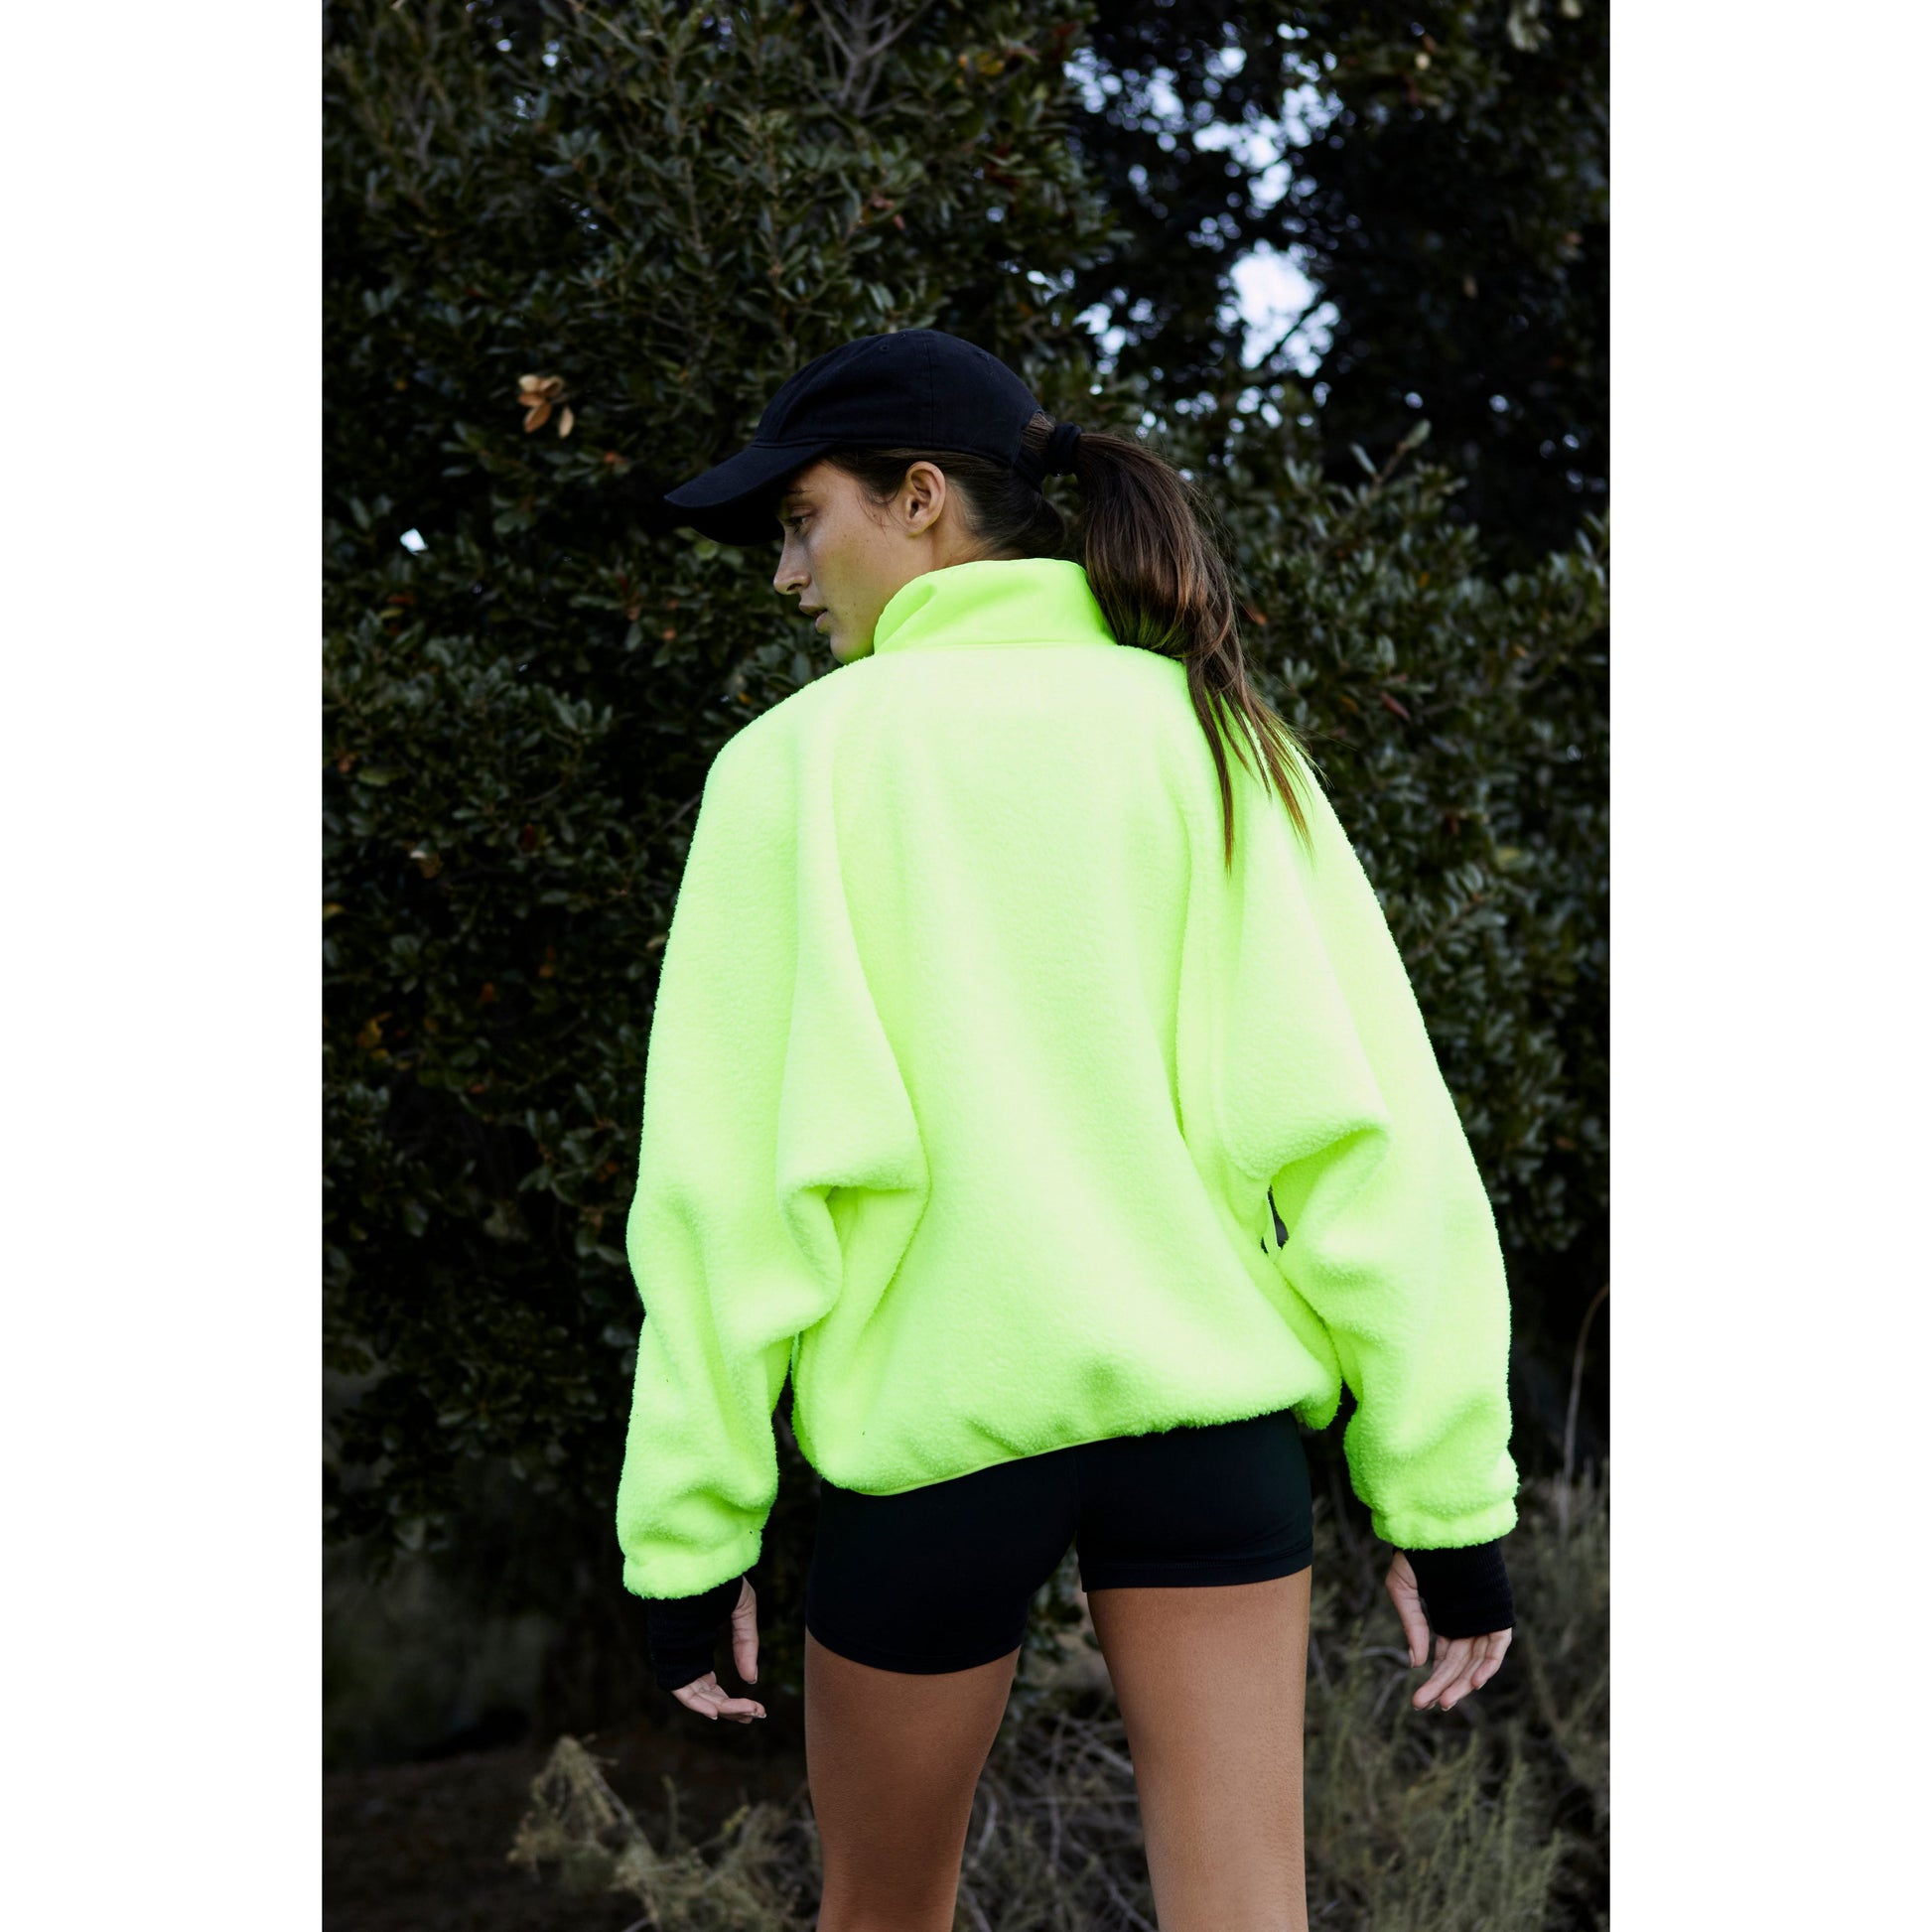 Woman in Free People Movement's Hit The Slopes Jacket in Highlighter green with zippered pockets and black shorts standing outdoors with a black cap, facing away from the camera.